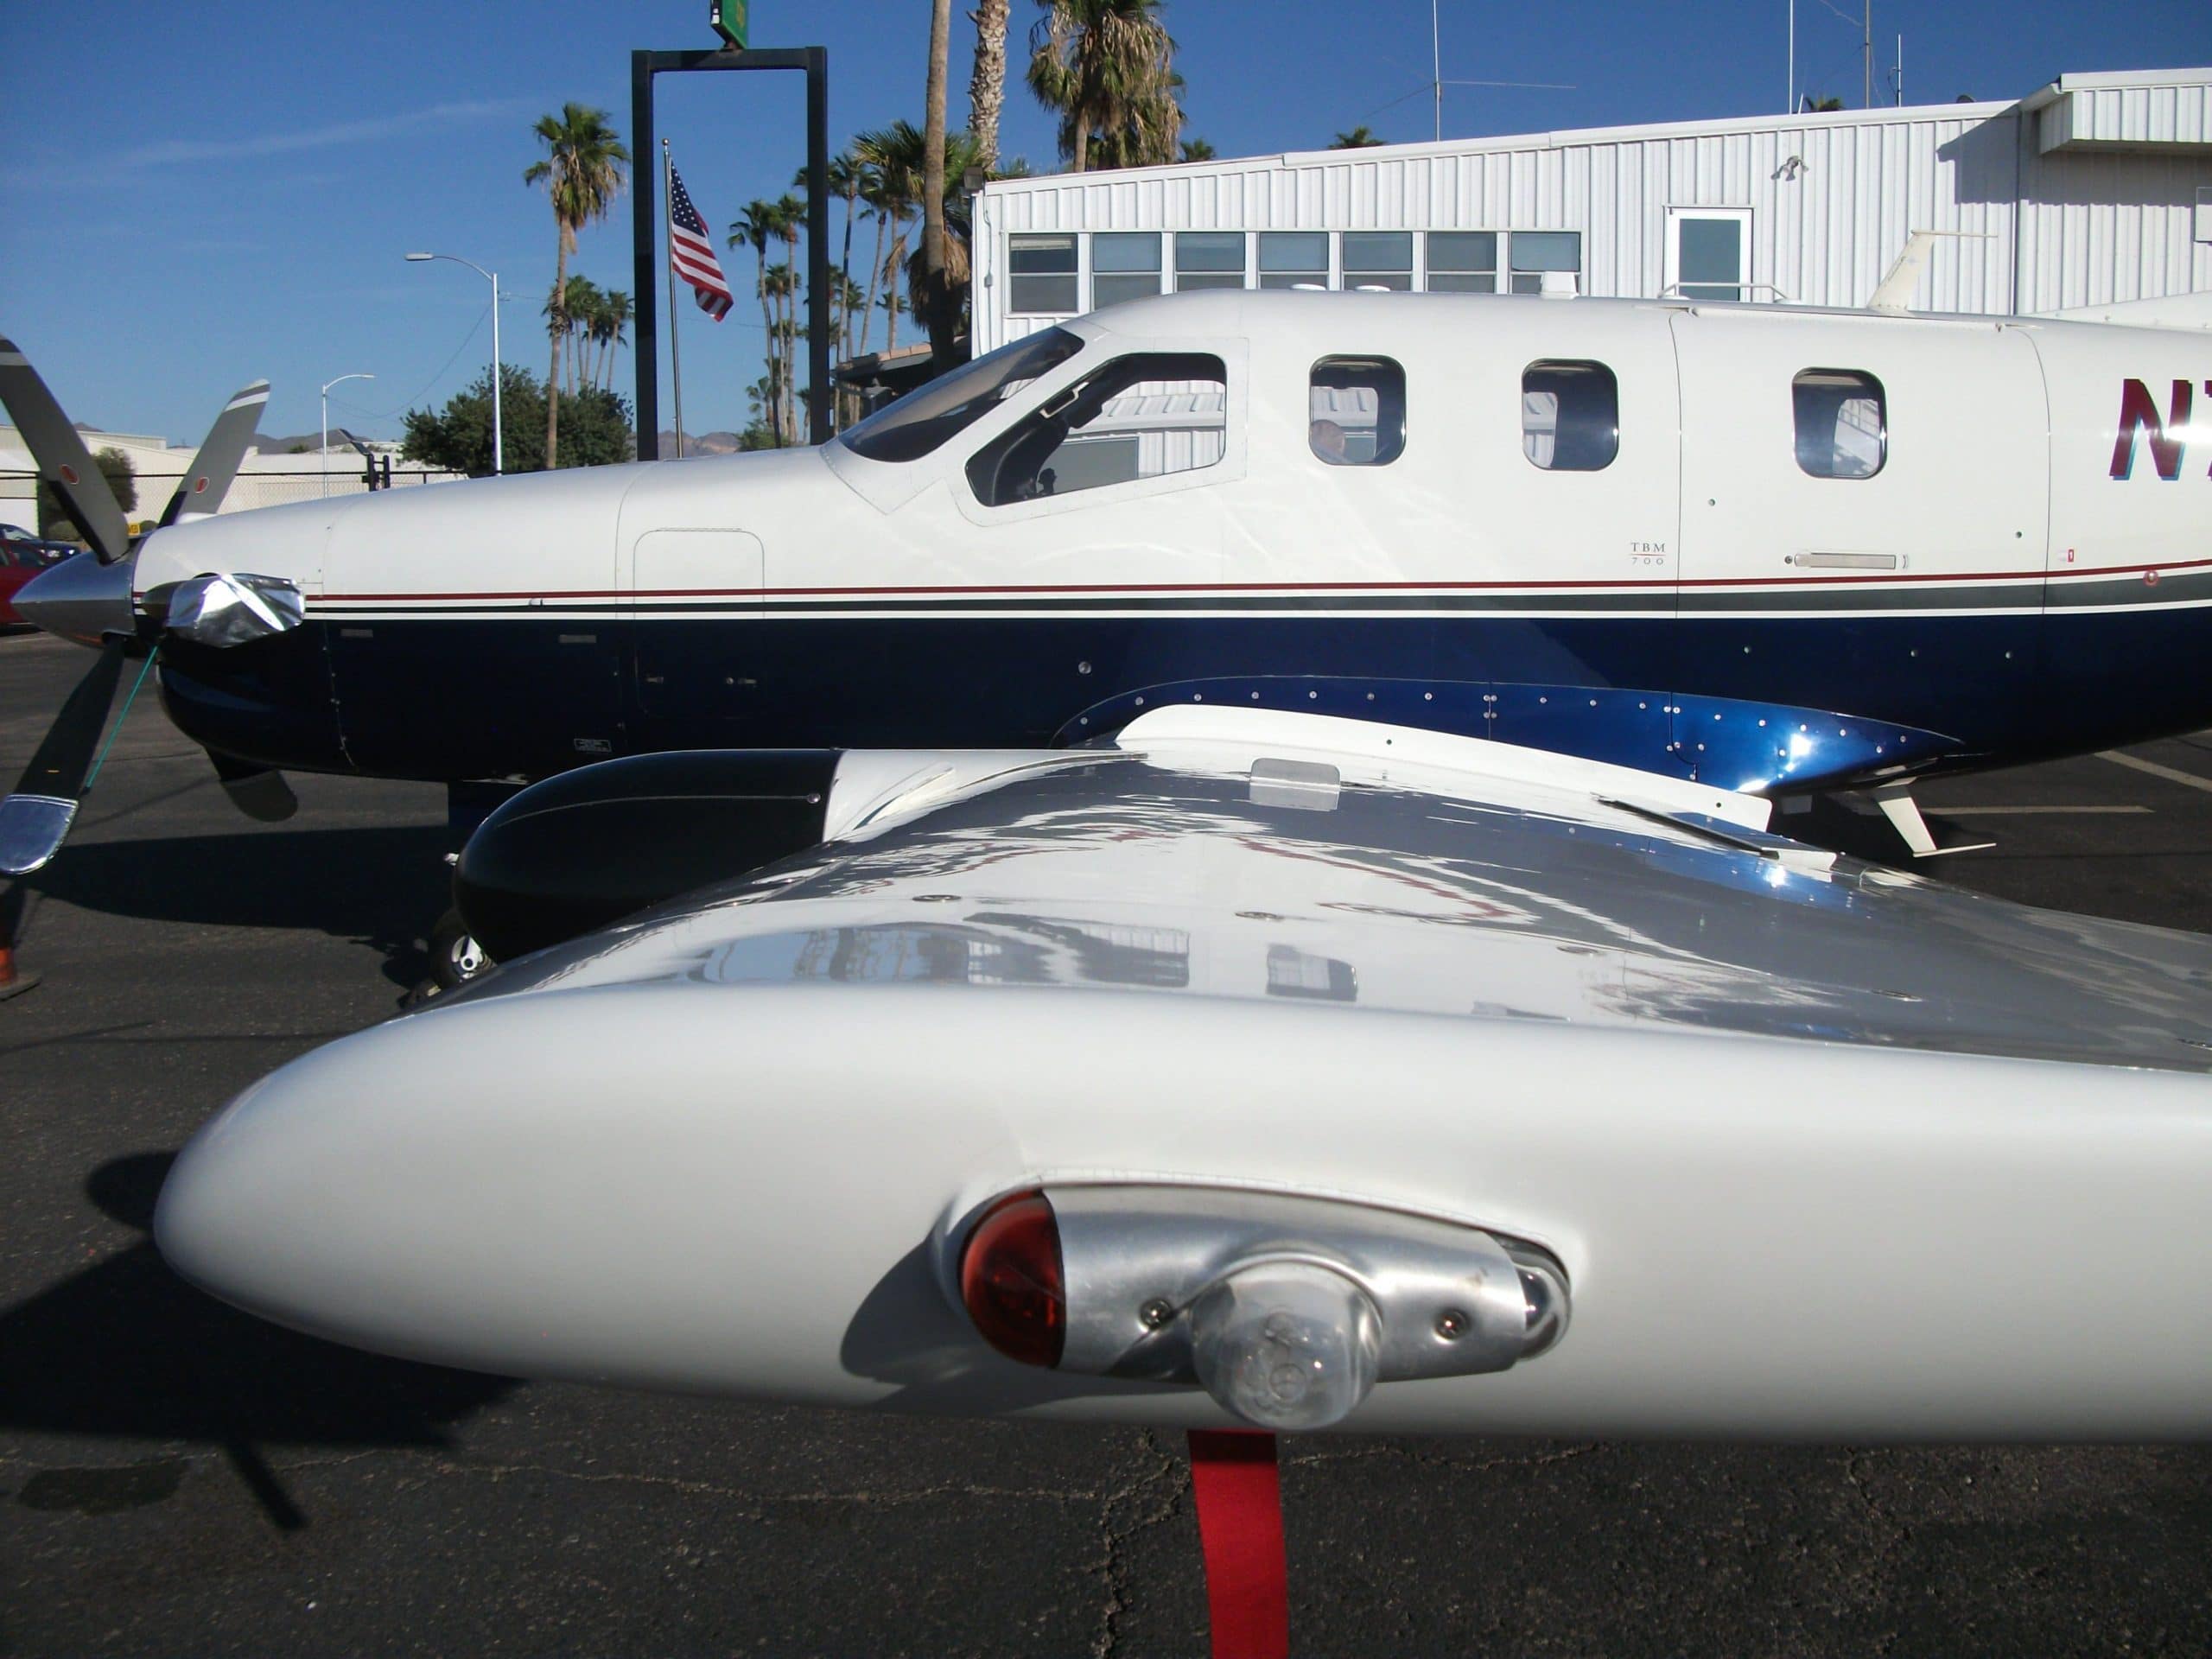 Best private jet custom detailing services in Arizona